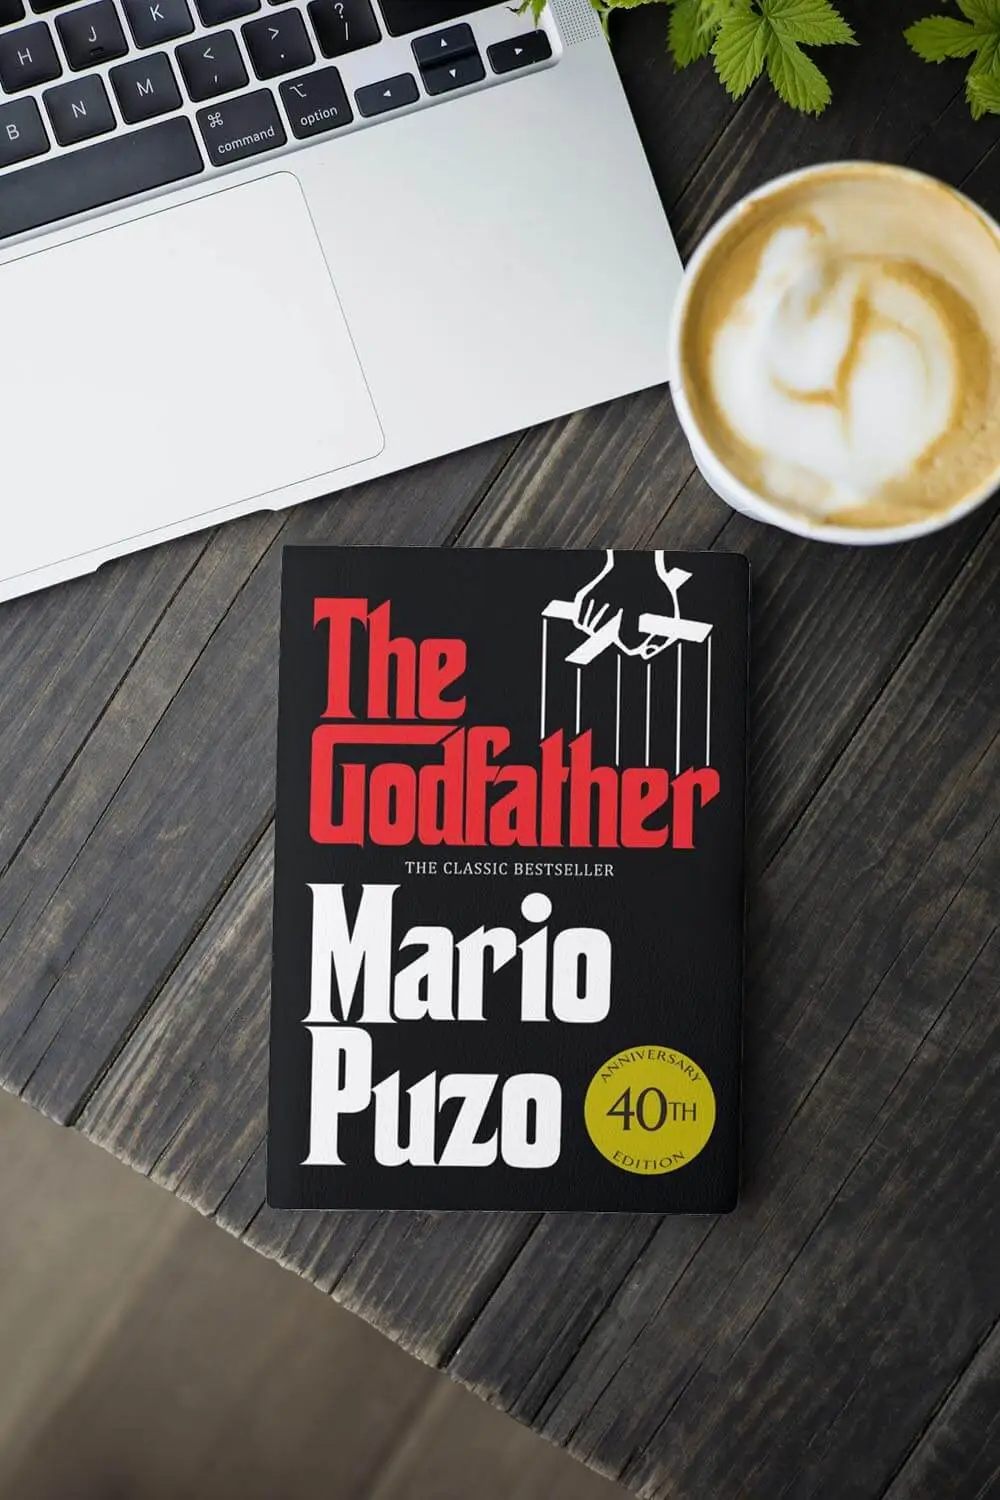 The Godfather by Mario Puzo: A Timeless Masterpiece of Power, Loyalty, and Redemption